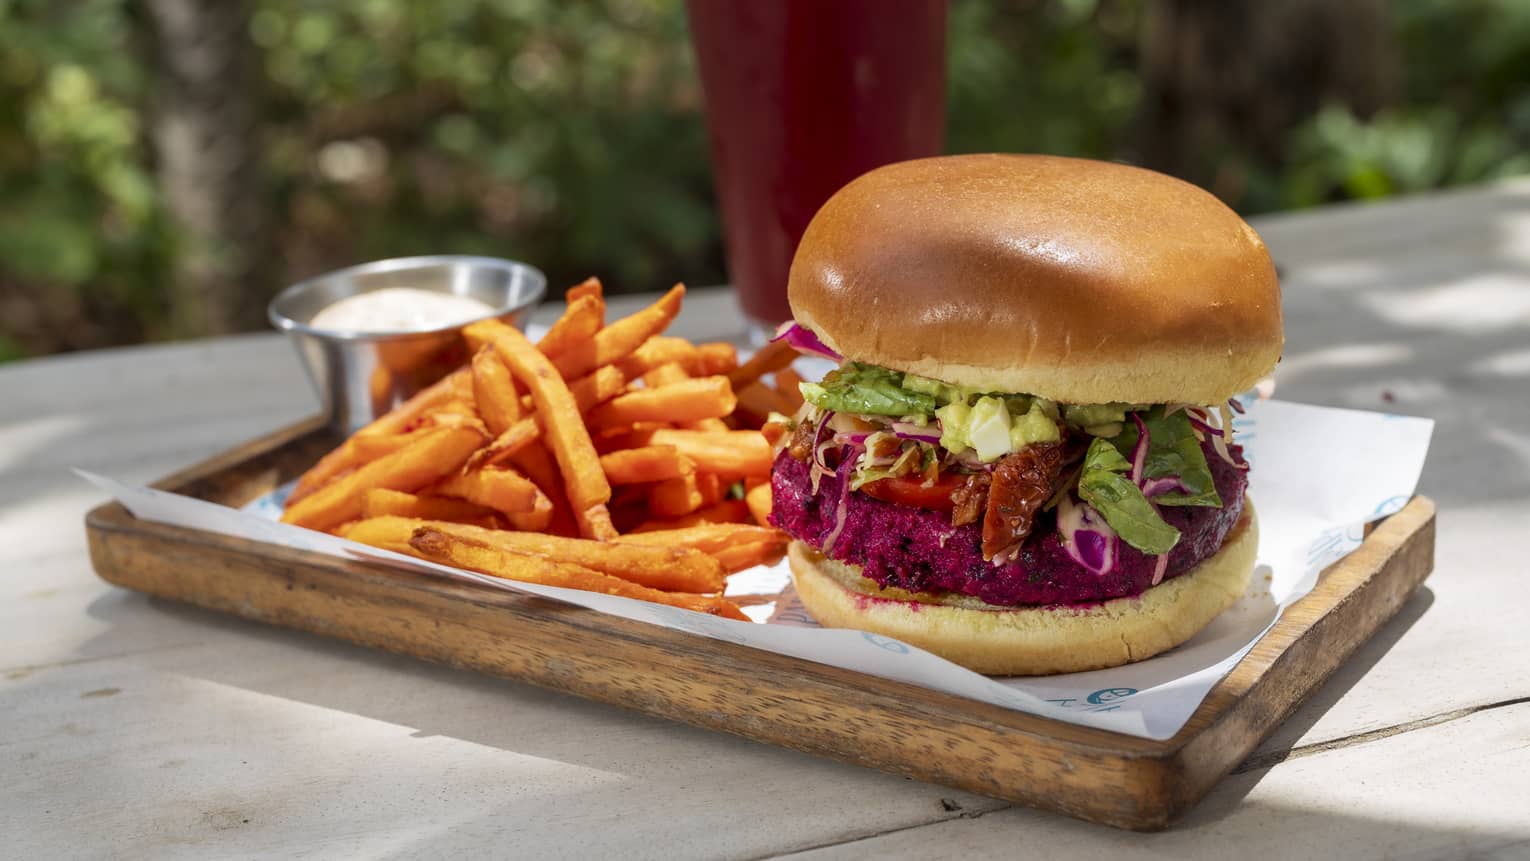 Burger served with a side of fries on a rectangular wooden plate